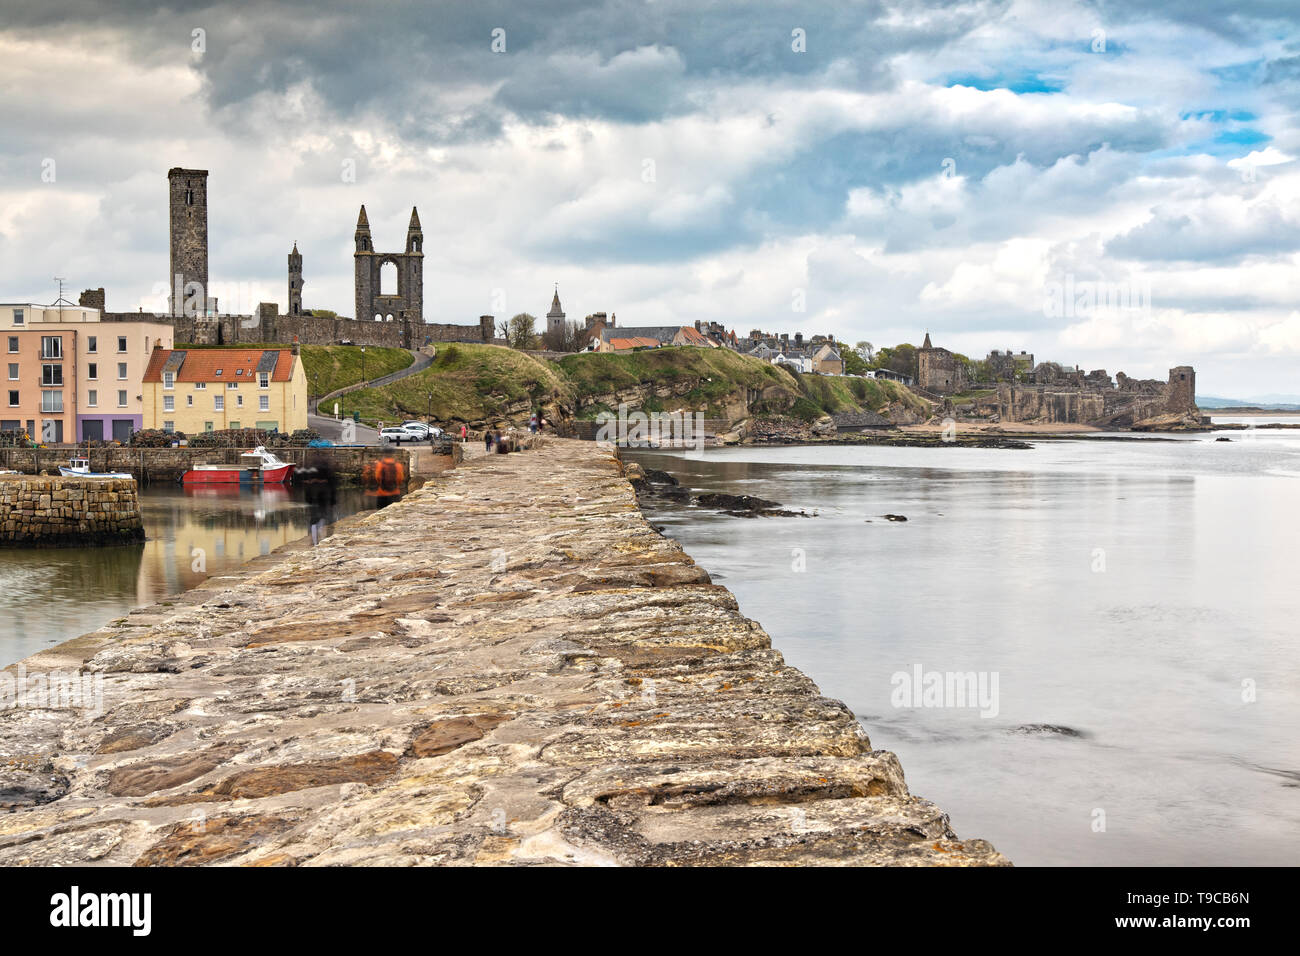 St Andrews Cathedral and Harbour in Scotland Stock Photo